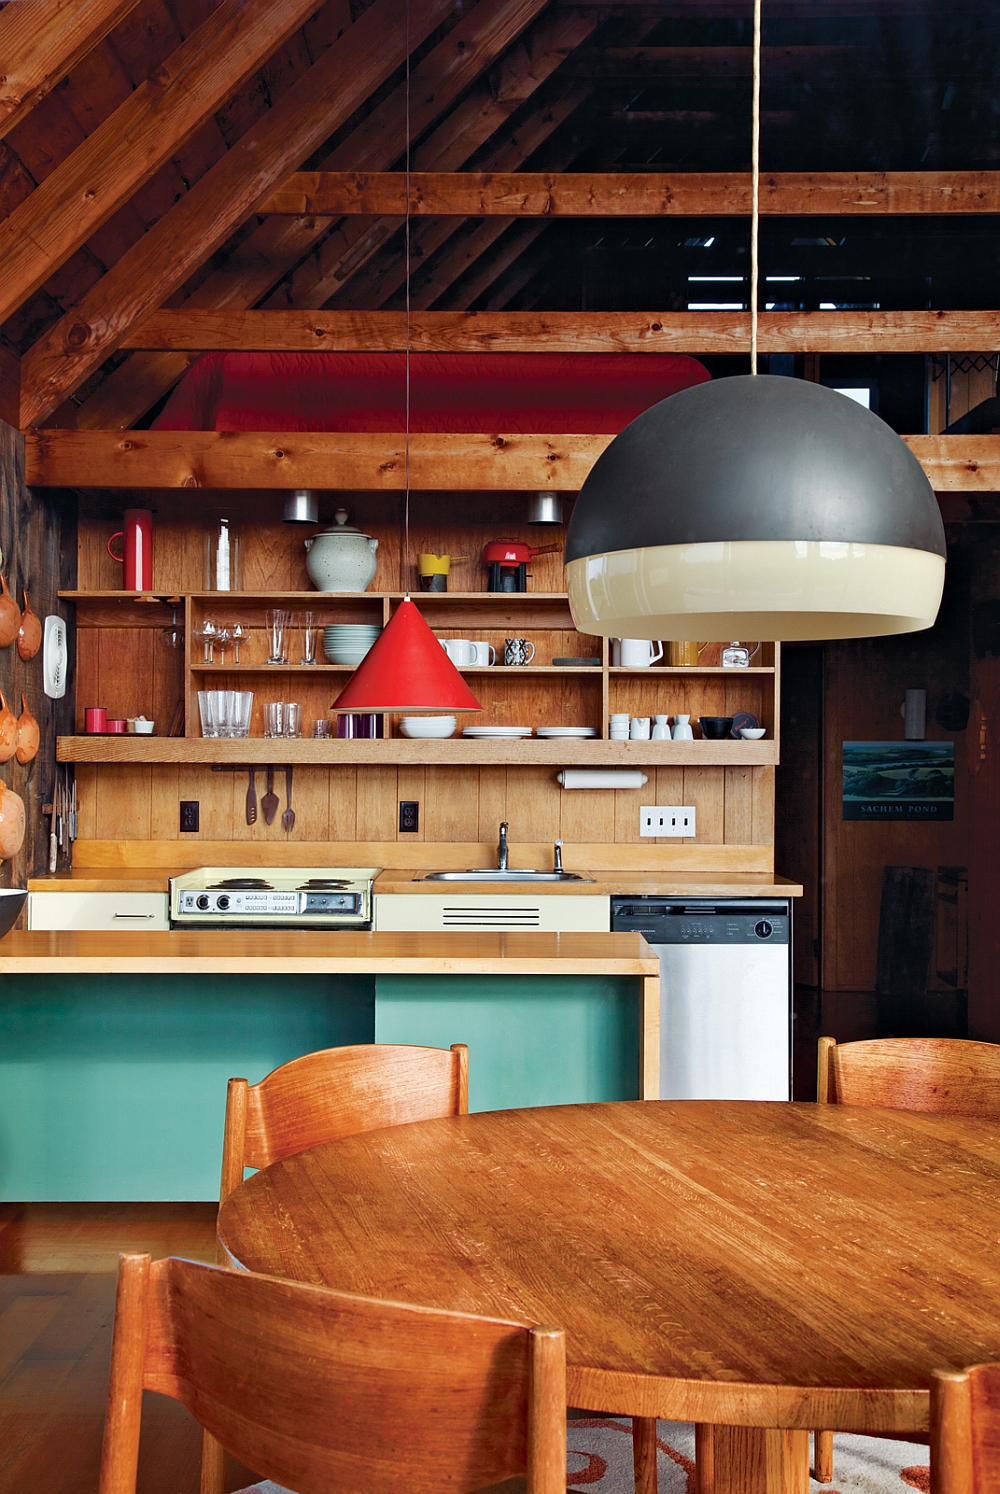 Lovely use of pendant lights inside the cool island retreat